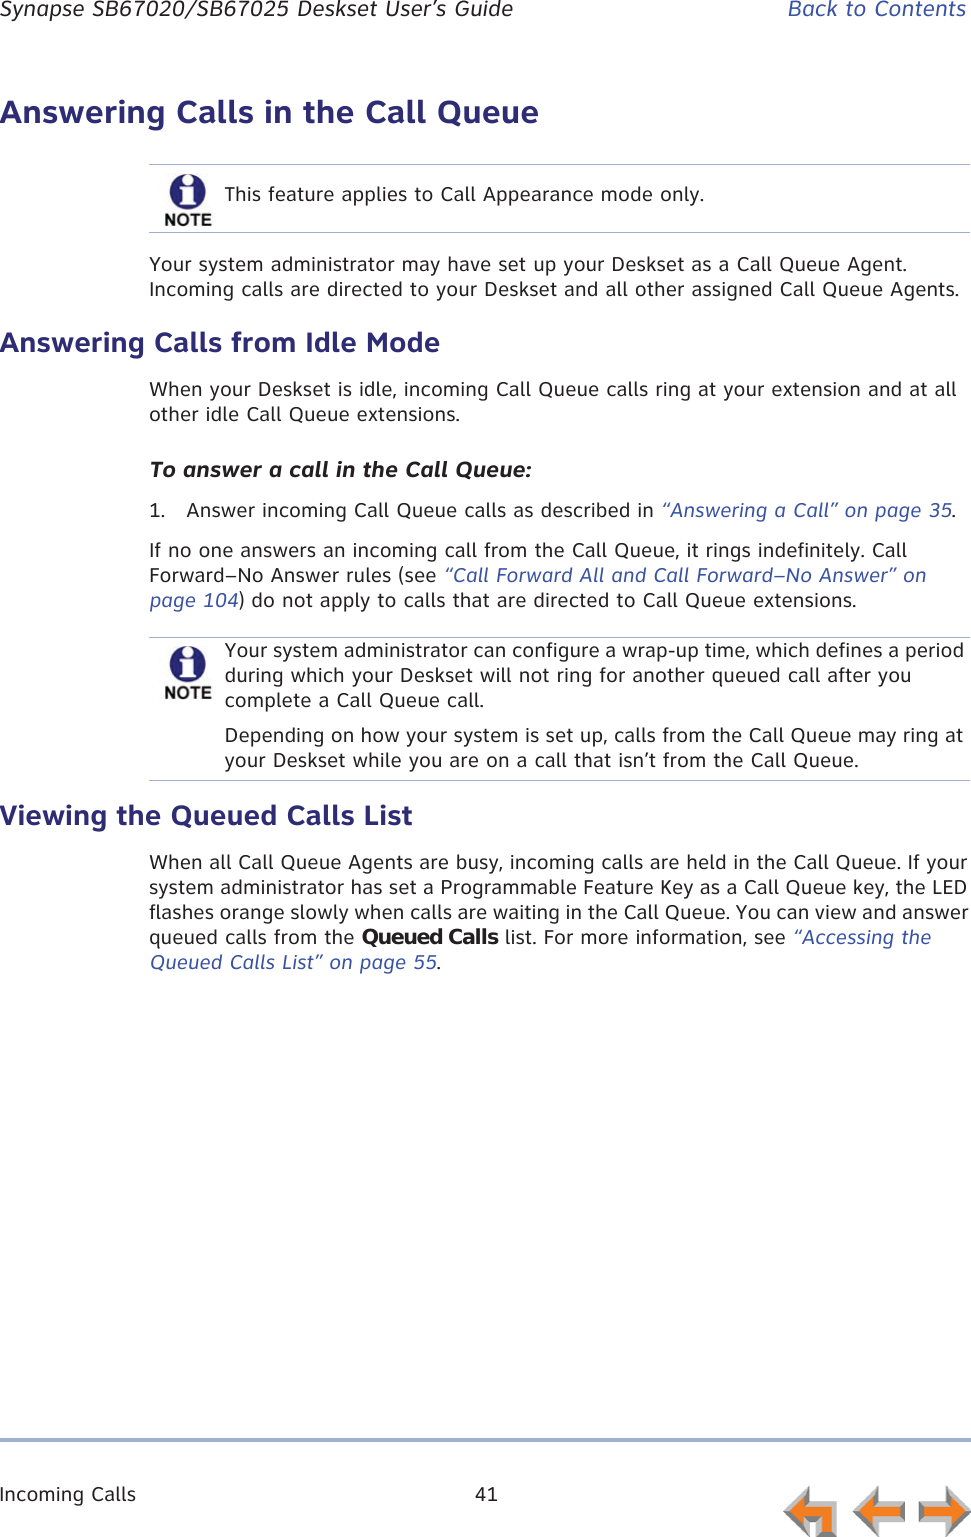 Incoming Calls 41      Synapse SB67020/SB67025 Deskset User’s Guide Back to ContentsAnswering Calls in the Call QueueYour system administrator may have set up your Deskset as a Call Queue Agent. Incoming calls are directed to your Deskset and all other assigned Call Queue Agents.Answering Calls from Idle ModeWhen your Deskset is idle, incoming Call Queue calls ring at your extension and at all other idle Call Queue extensions.To answer a call in the Call Queue:1. Answer incoming Call Queue calls as described in “Answering a Call” on page 35.If no one answers an incoming call from the Call Queue, it rings indefinitely. Call Forward–No Answer rules (see “Call Forward All and Call Forward–No Answer” on page 104) do not apply to calls that are directed to Call Queue extensions.Viewing the Queued Calls ListWhen all Call Queue Agents are busy, incoming calls are held in the Call Queue. If your system administrator has set a Programmable Feature Key as a Call Queue key, the LED flashes orange slowly when calls are waiting in the Call Queue. You can view and answer queued calls from the Queued Calls list. For more information, see “Accessing the Queued Calls List” on page 55.This feature applies to Call Appearance mode only.Your system administrator can configure a wrap-up time, which defines a period during which your Deskset will not ring for another queued call after you complete a Call Queue call.Depending on how your system is set up, calls from the Call Queue may ring at your Deskset while you are on a call that isn’t from the Call Queue.